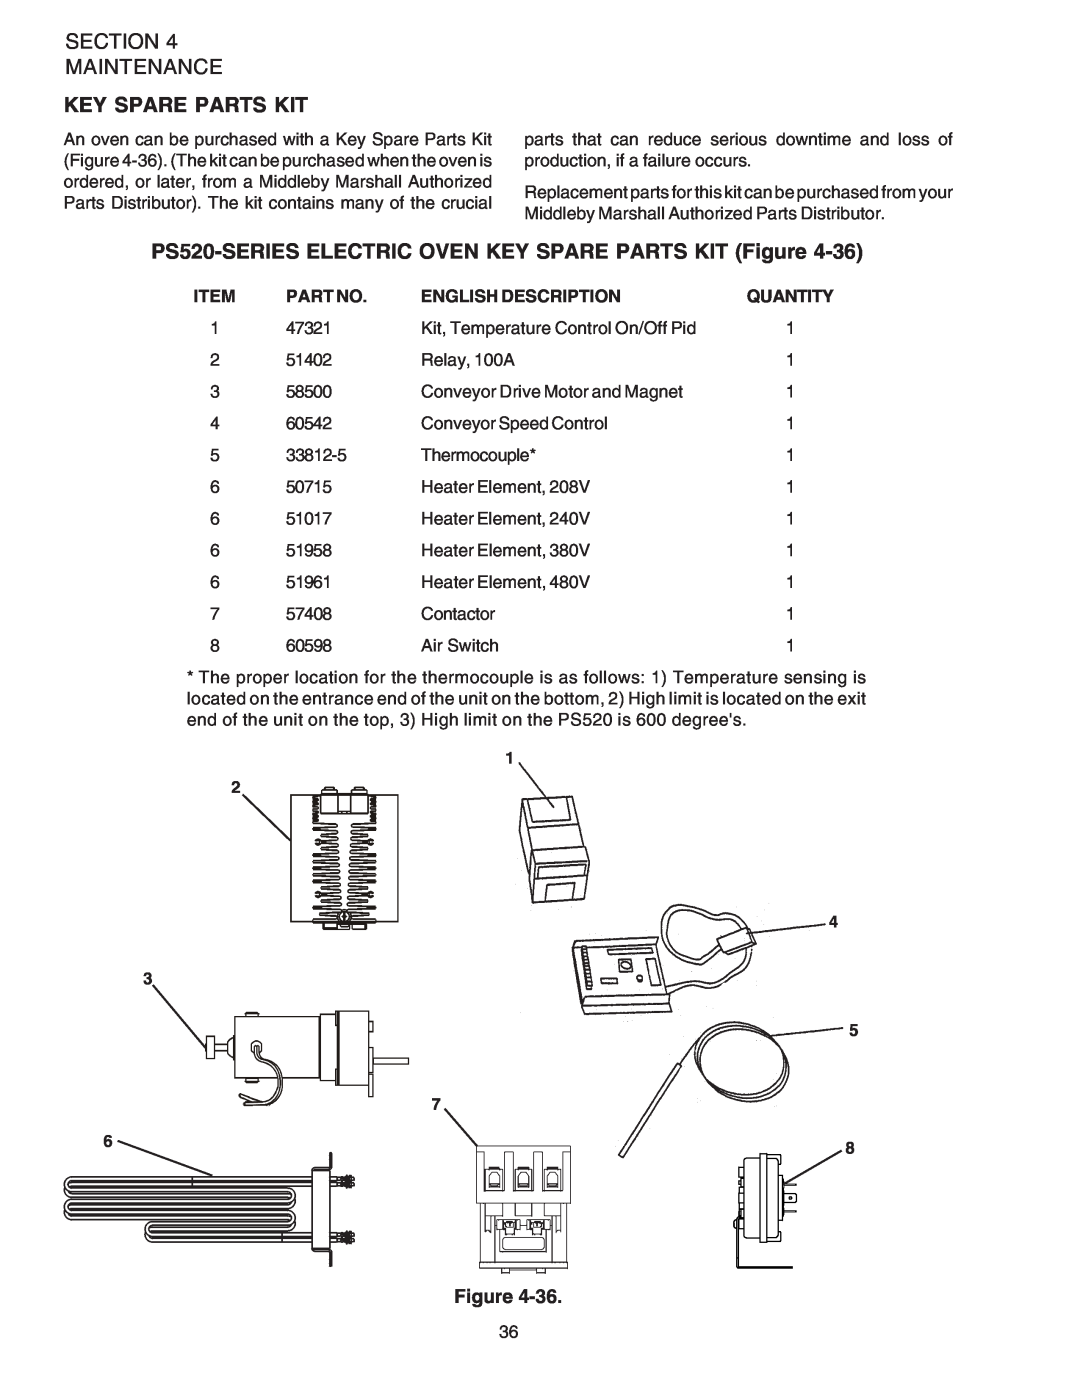 Middleby Marshall PS520 Section Maintenance, Key Spare Parts Kit, Part No, English Description, Quantity 